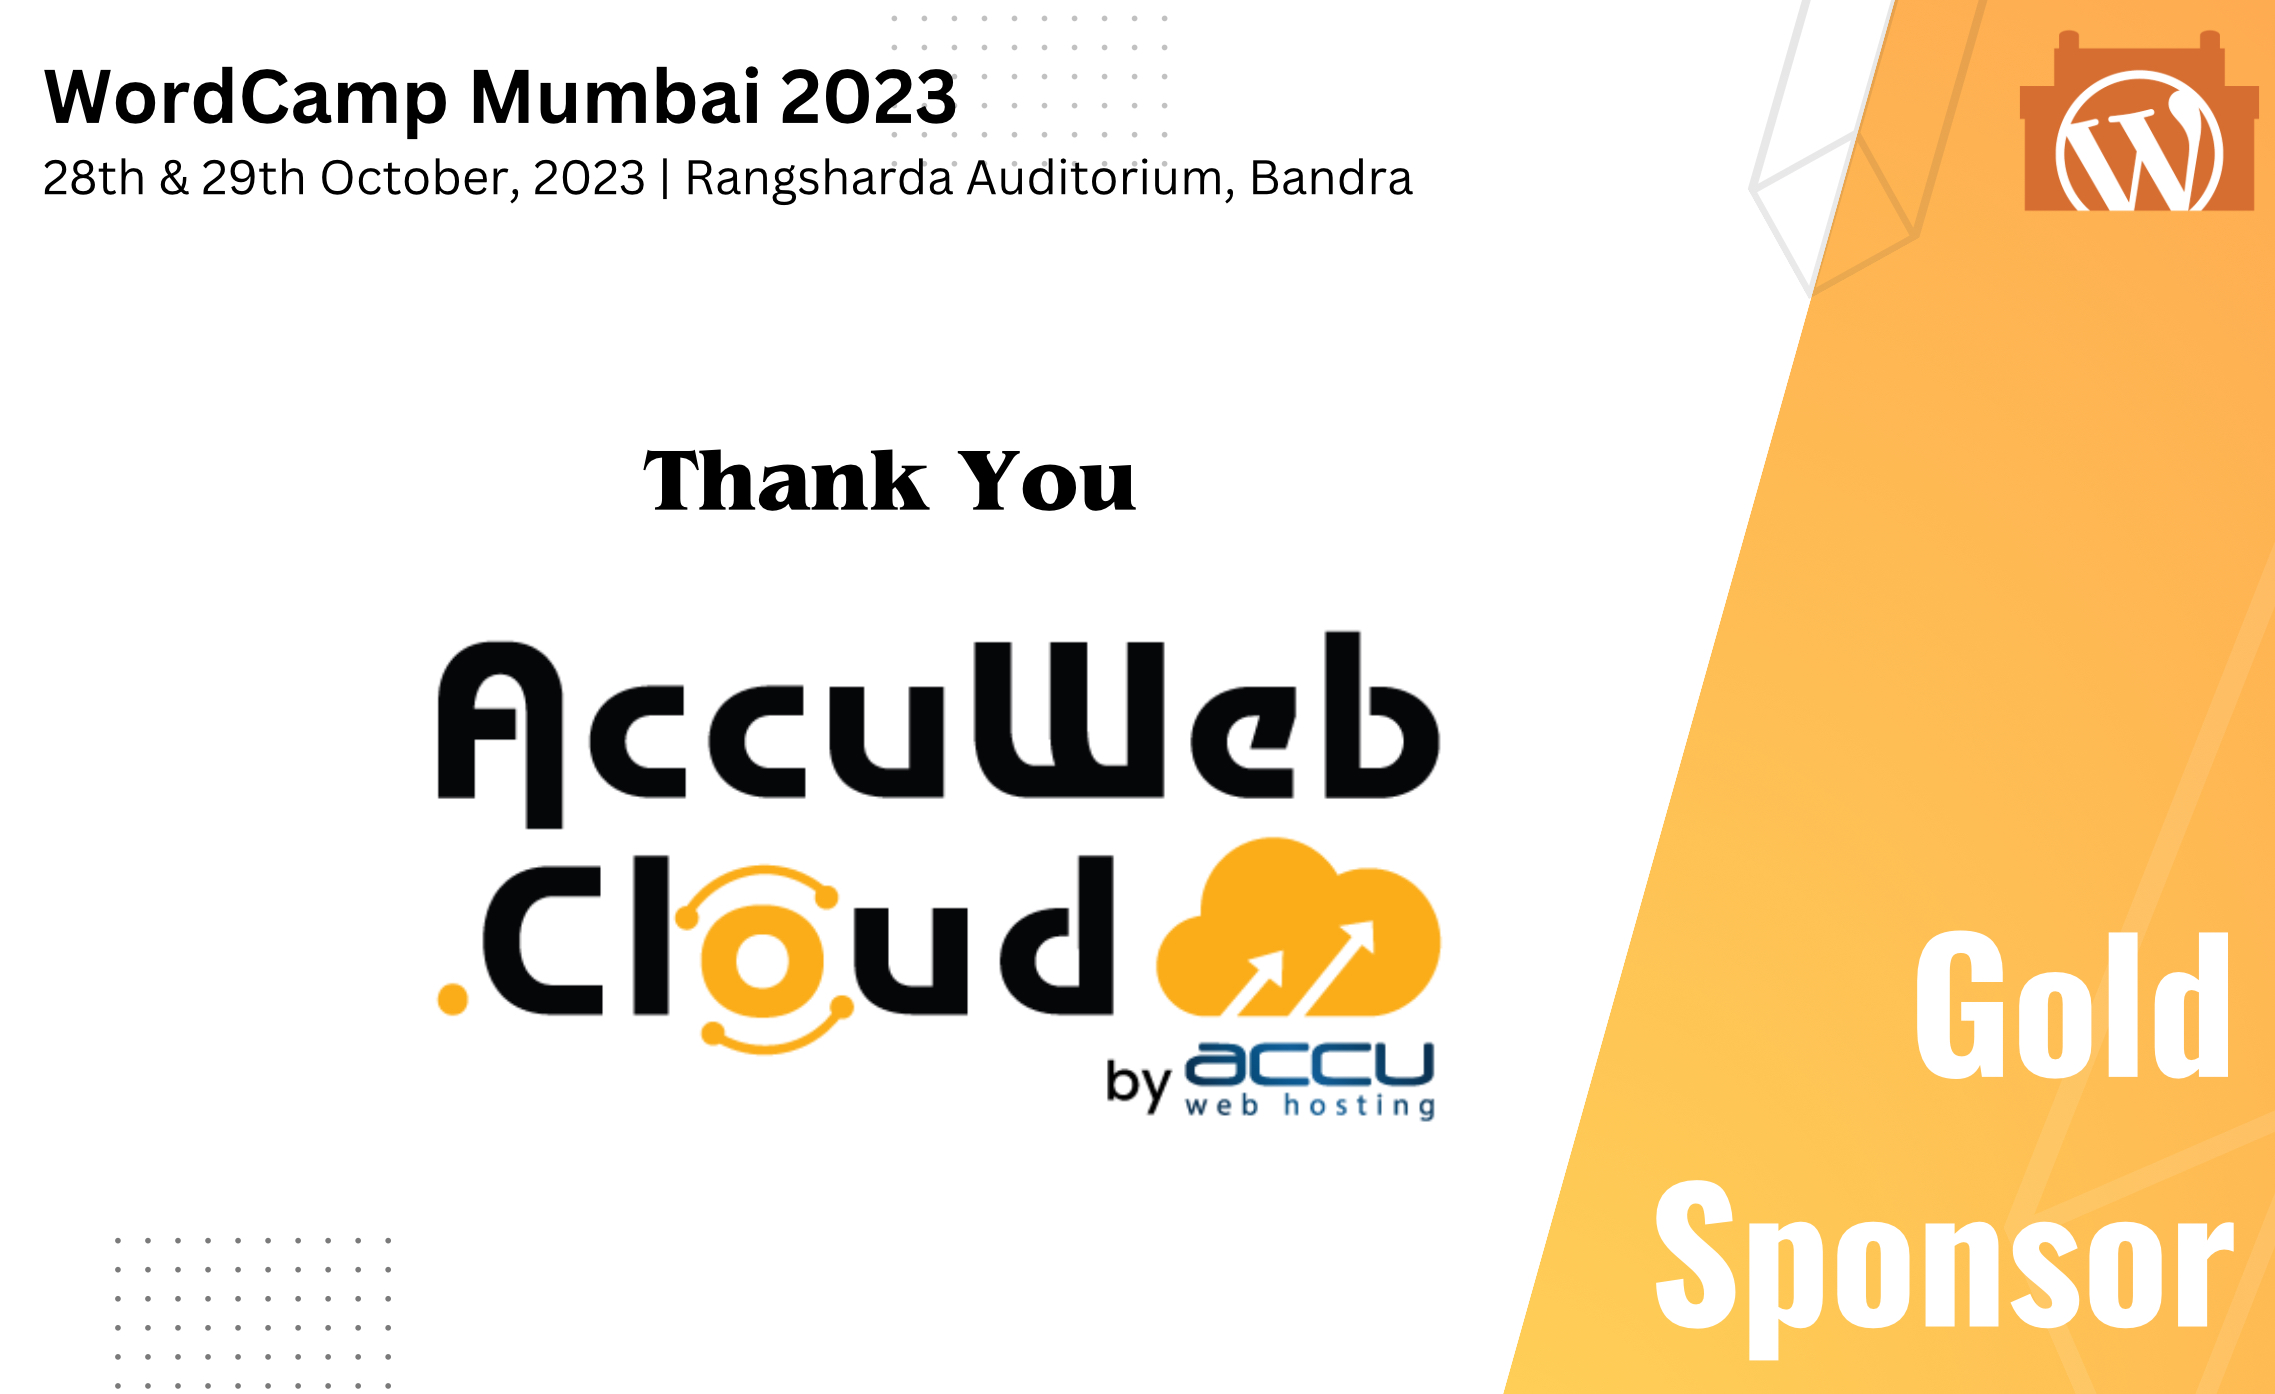 Thank You AccuWeb.cloud, for being our Gold Sponsor